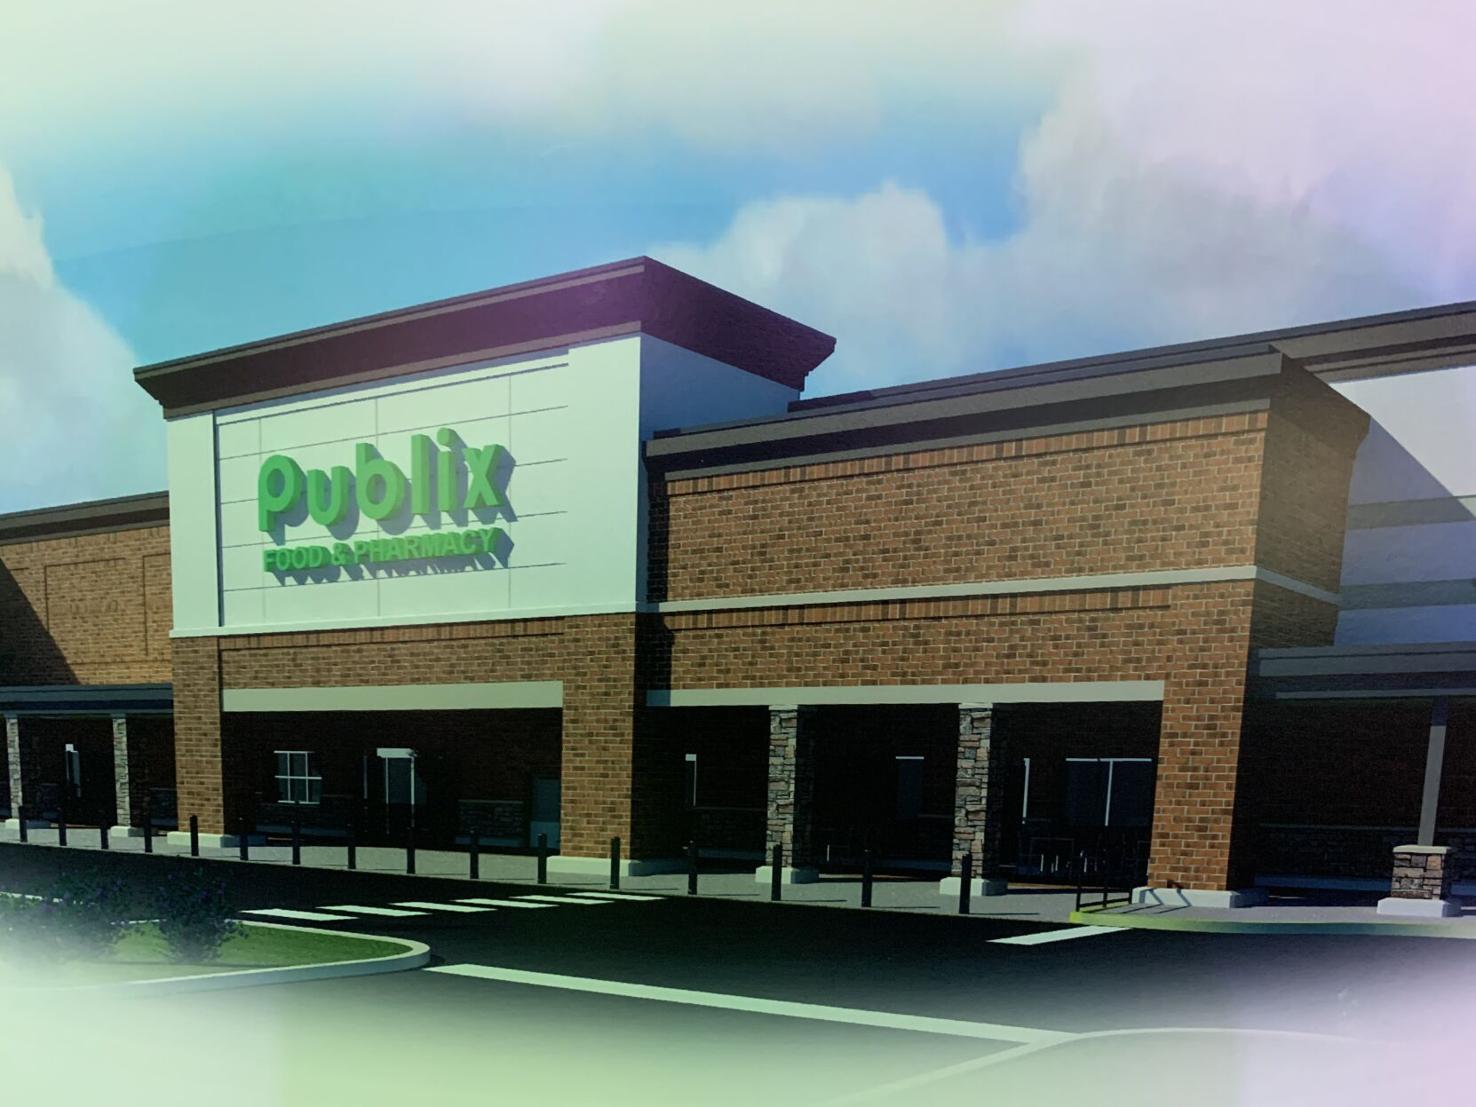 Publix breaks ground on 1st Louisville super market with 2 more planned